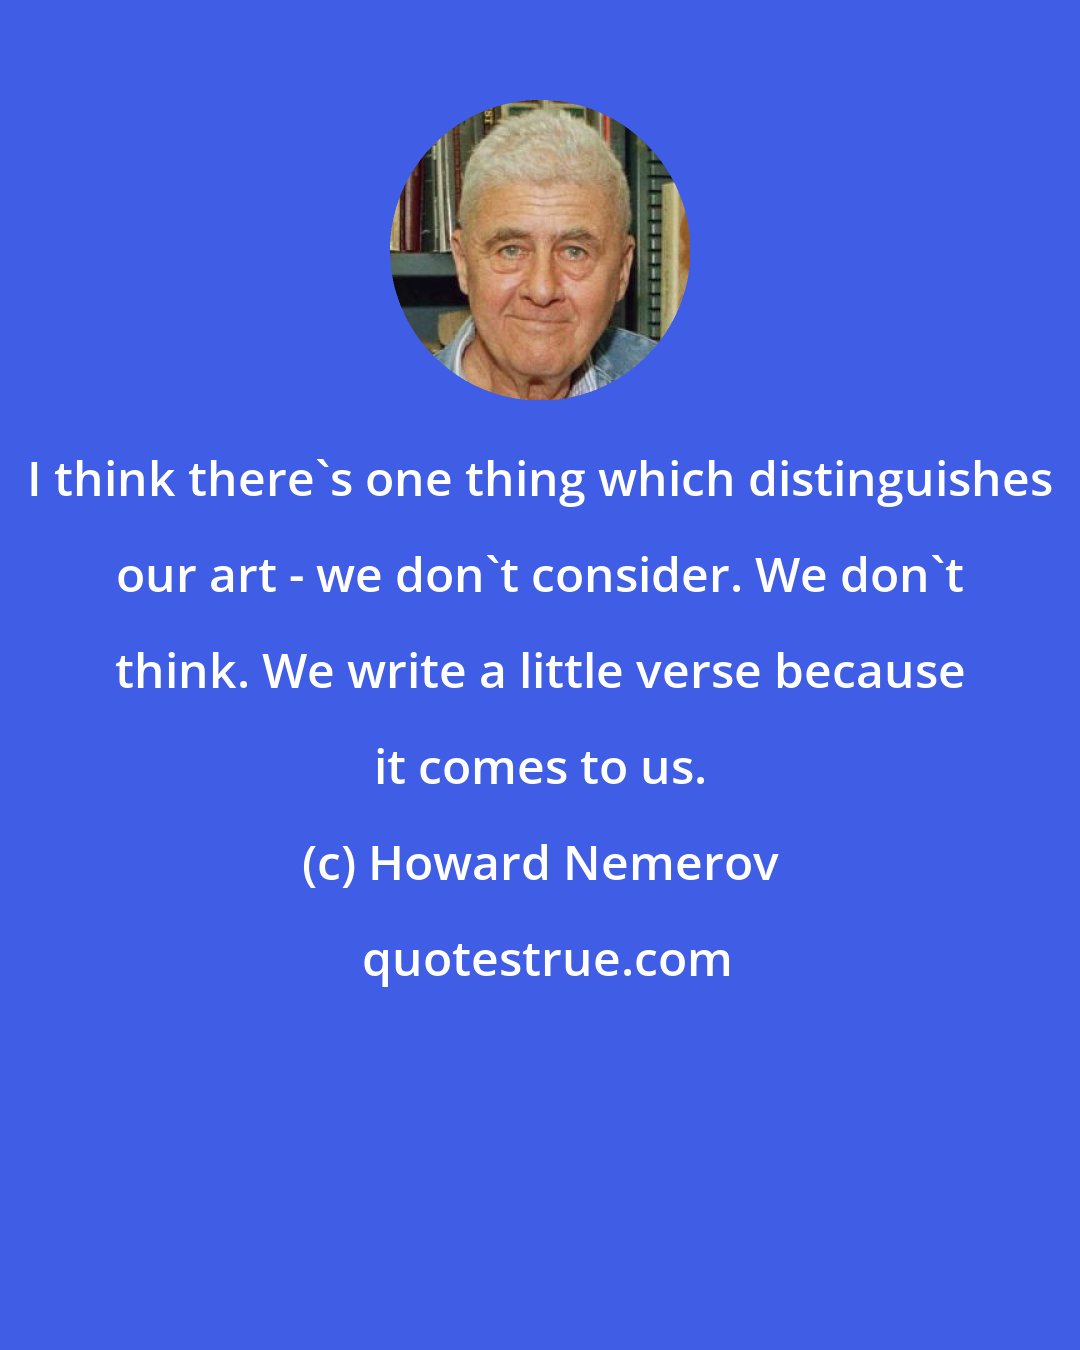 Howard Nemerov: I think there's one thing which distinguishes our art - we don't consider. We don't think. We write a little verse because it comes to us.